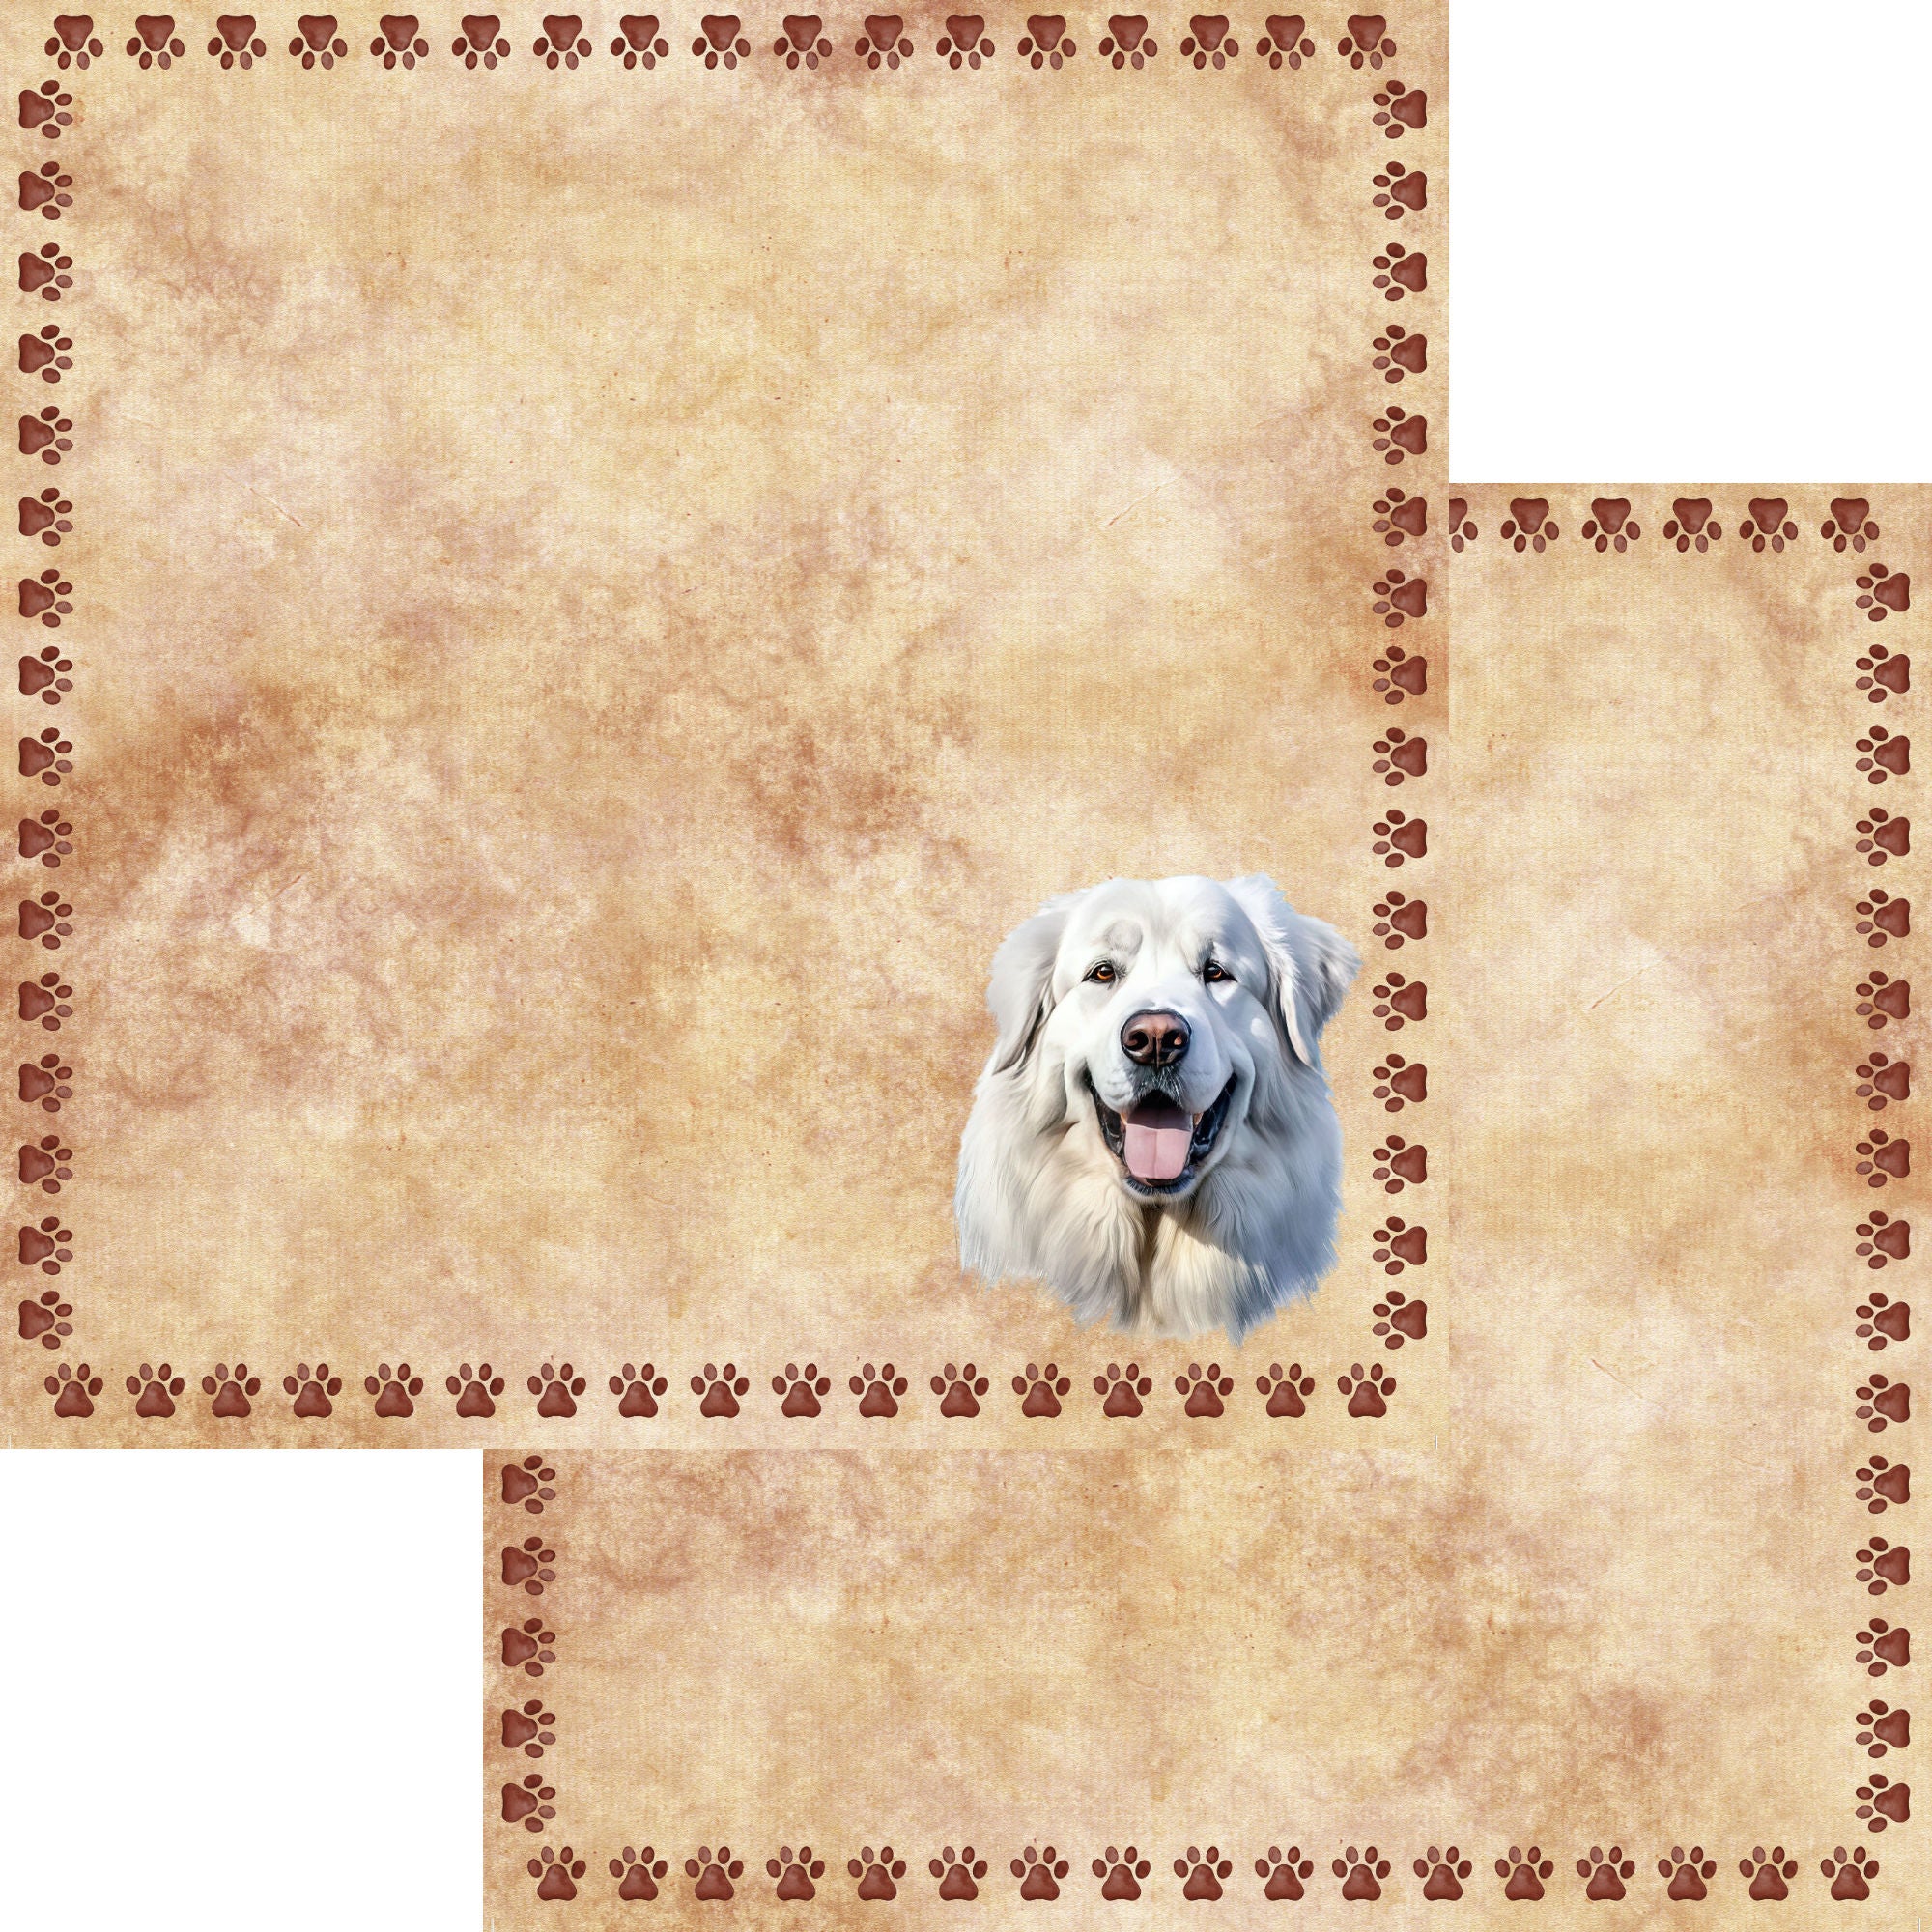 Dog Breeds Collection Great Pyrenees 12 x 12 Double-Sided Scrapbook Paper by SSC Designs